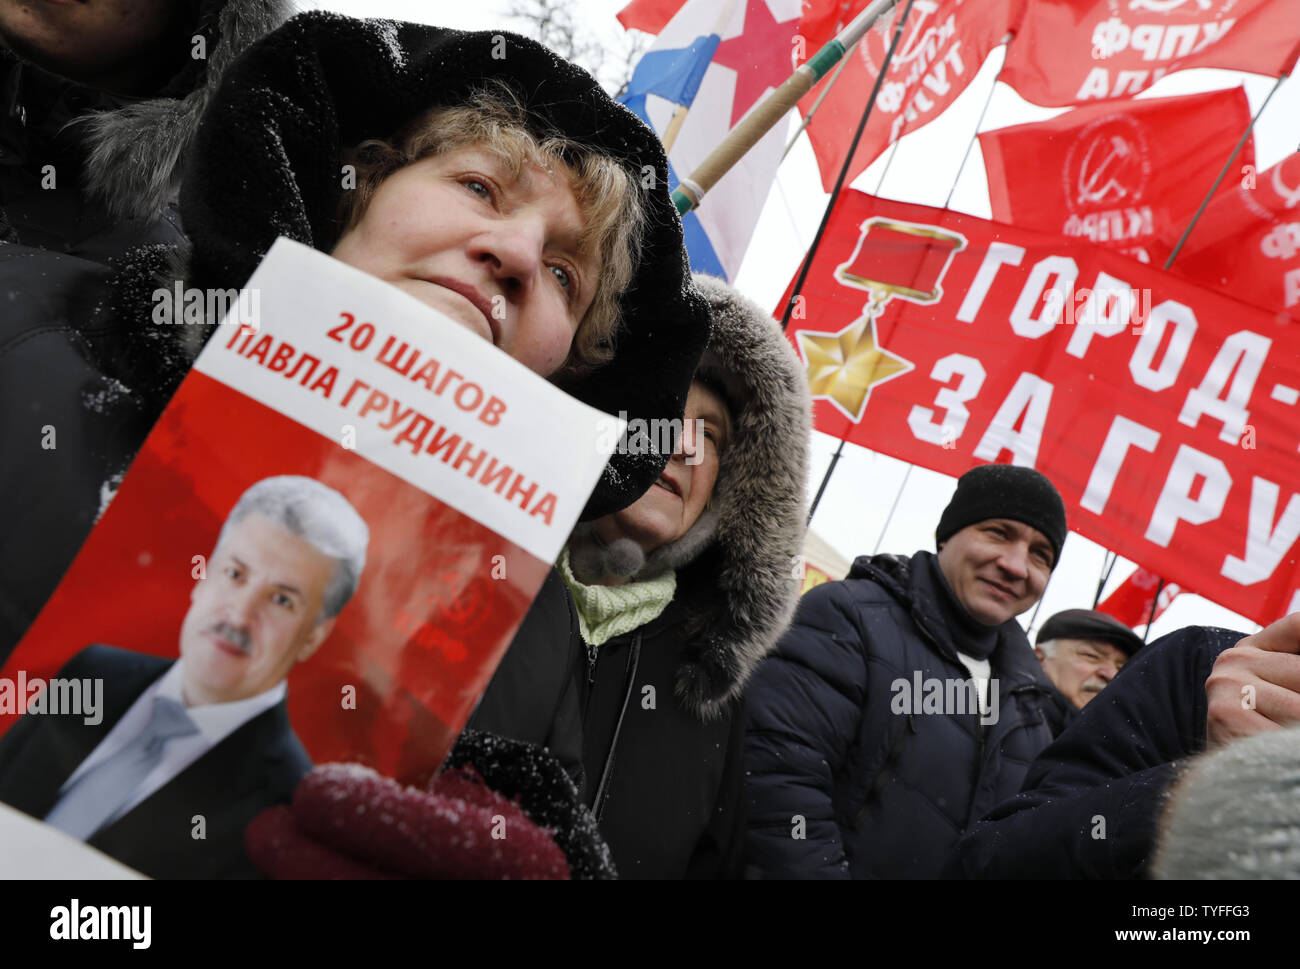 A woman holds portrait of Pavel Grudinin, presidential hopeful of the Russian Communist Party, during a rally for fair elections in Moscow on March 10, 2018. The placard is reads in Russian as 20 steps of Pavel Grudinin. Grudinin is considered as main  presidential candidate behind Vladimir Putin. Photo by Yuri Gripas/UPI Stock Photo